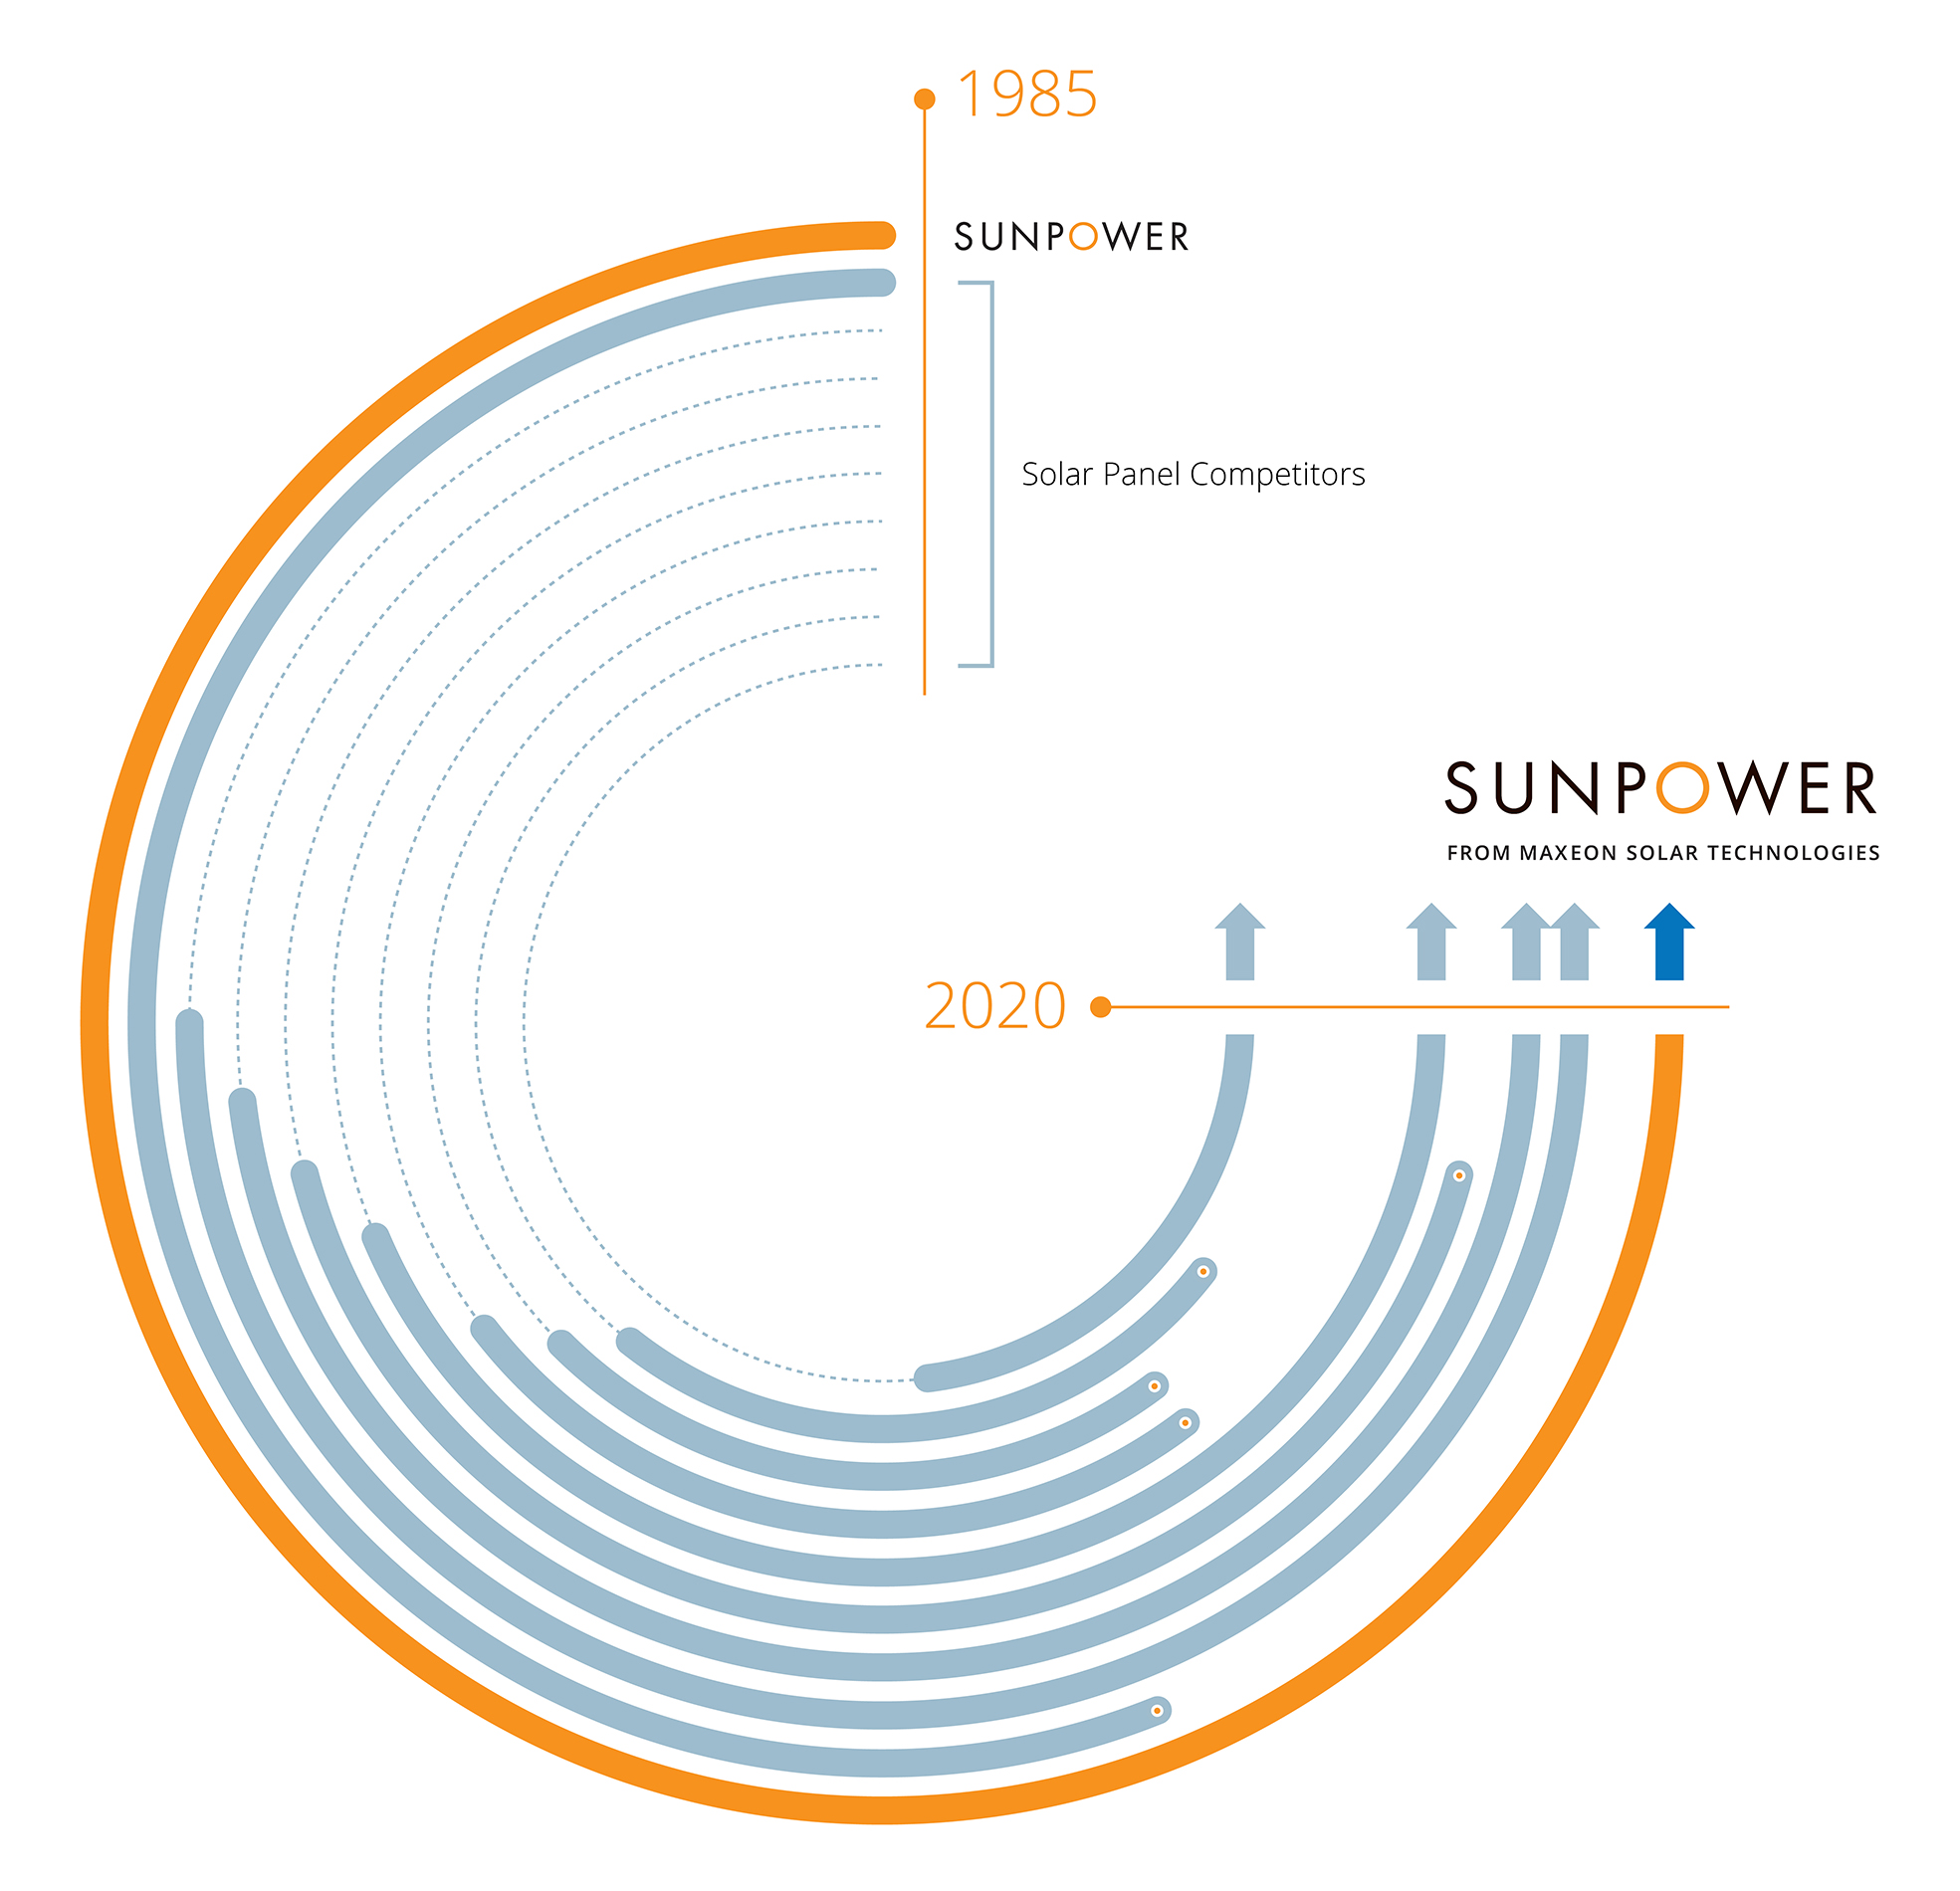 SunPower - from Maxeon Solar Technologies - graphic timeline against competitors